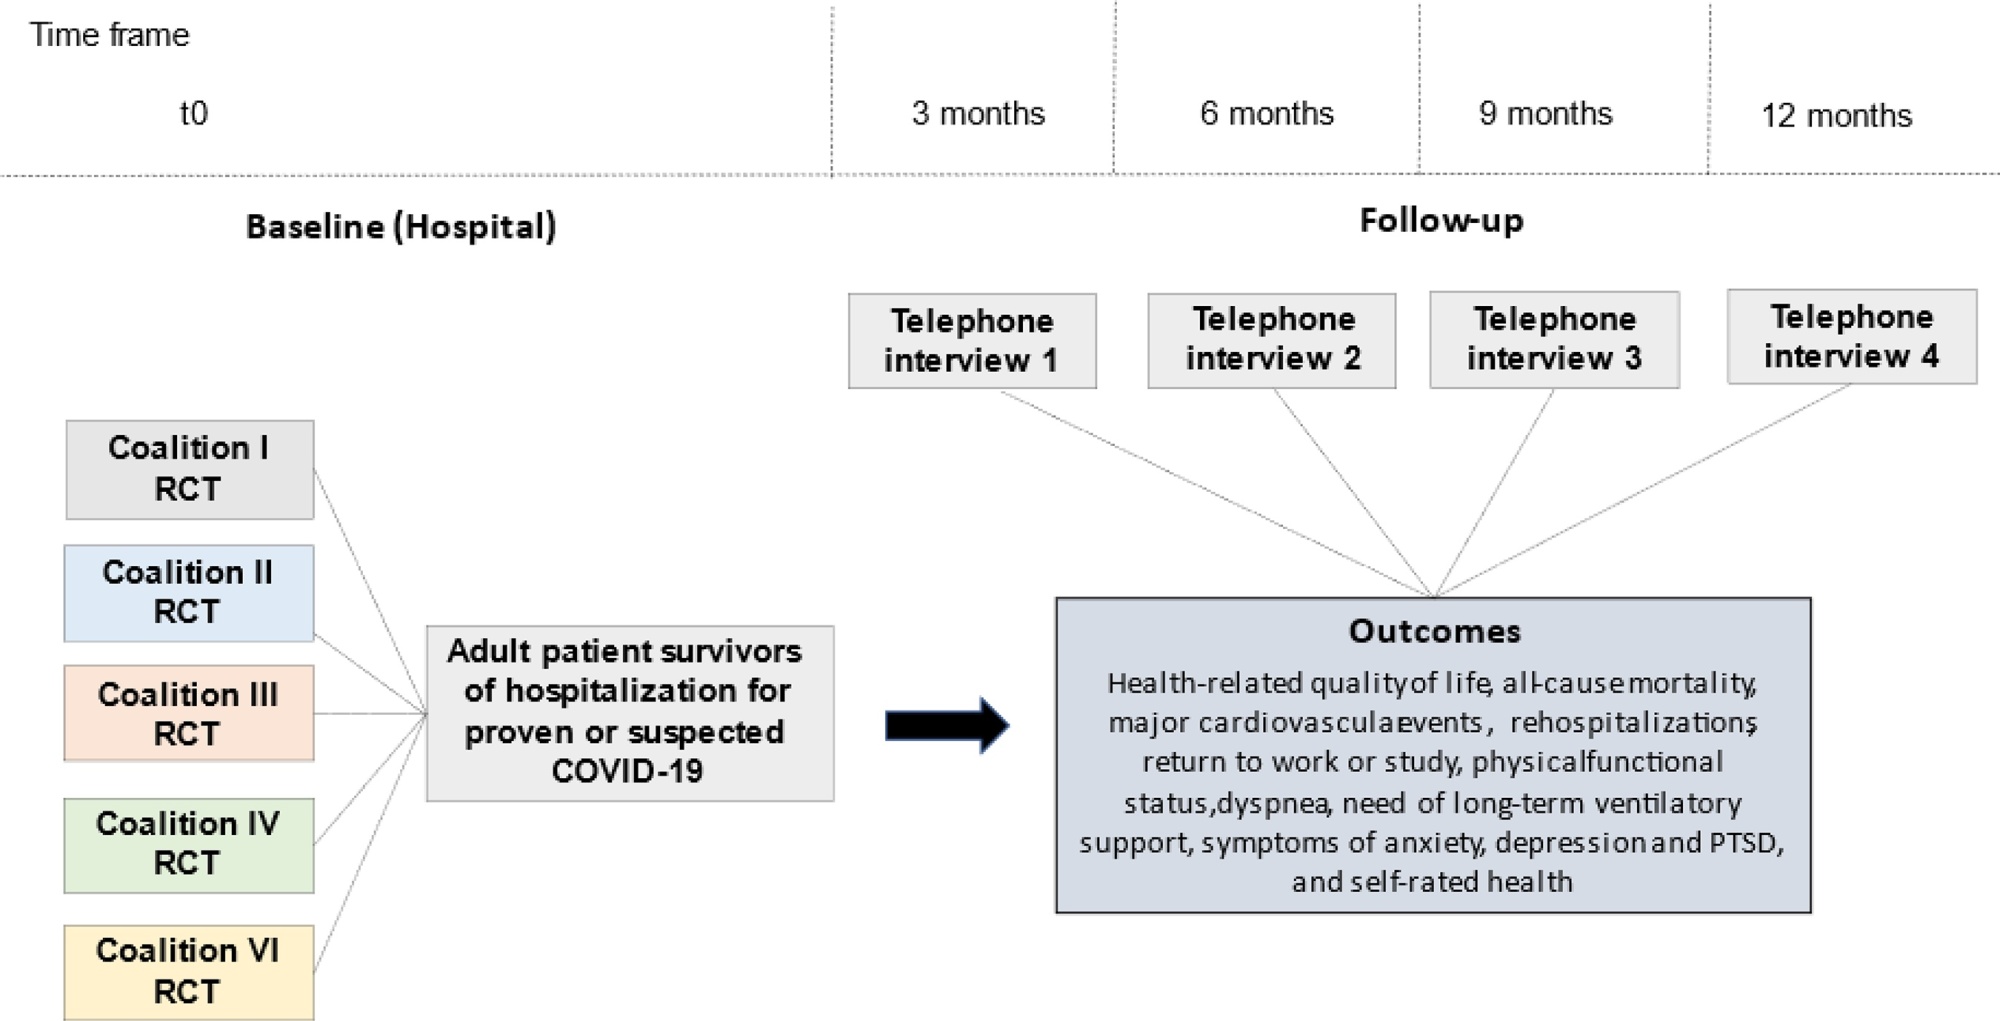 Quality of life and long-term outcomes after hospitalization for COVID-19: Protocol for a prospective cohort study (Coalition VII)